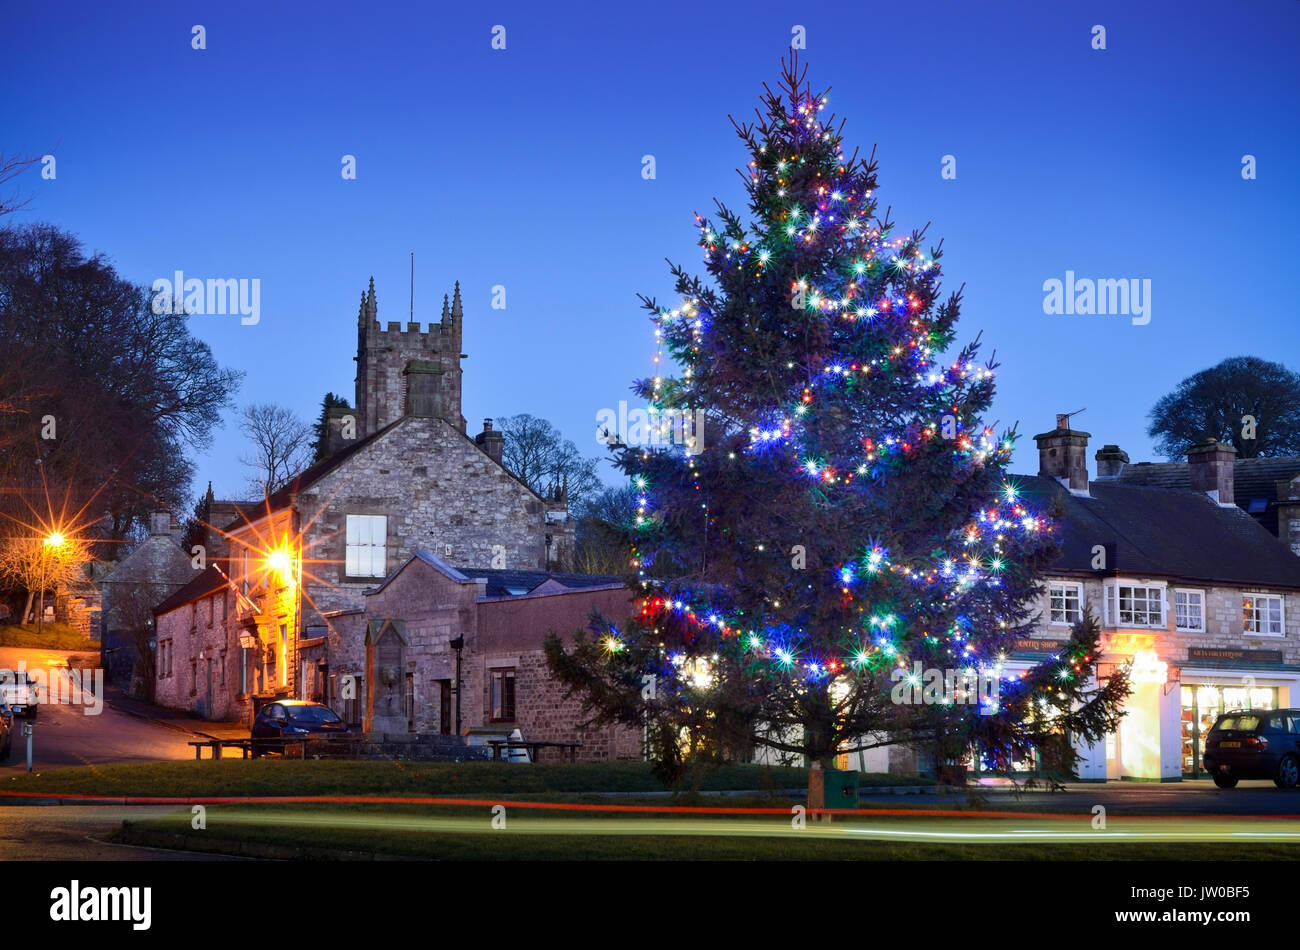 A Christmas tree and festive lights embellish the centre of Hartington, a scenic village in the Peak District,Derbyshire,England UK - December Stock Photo